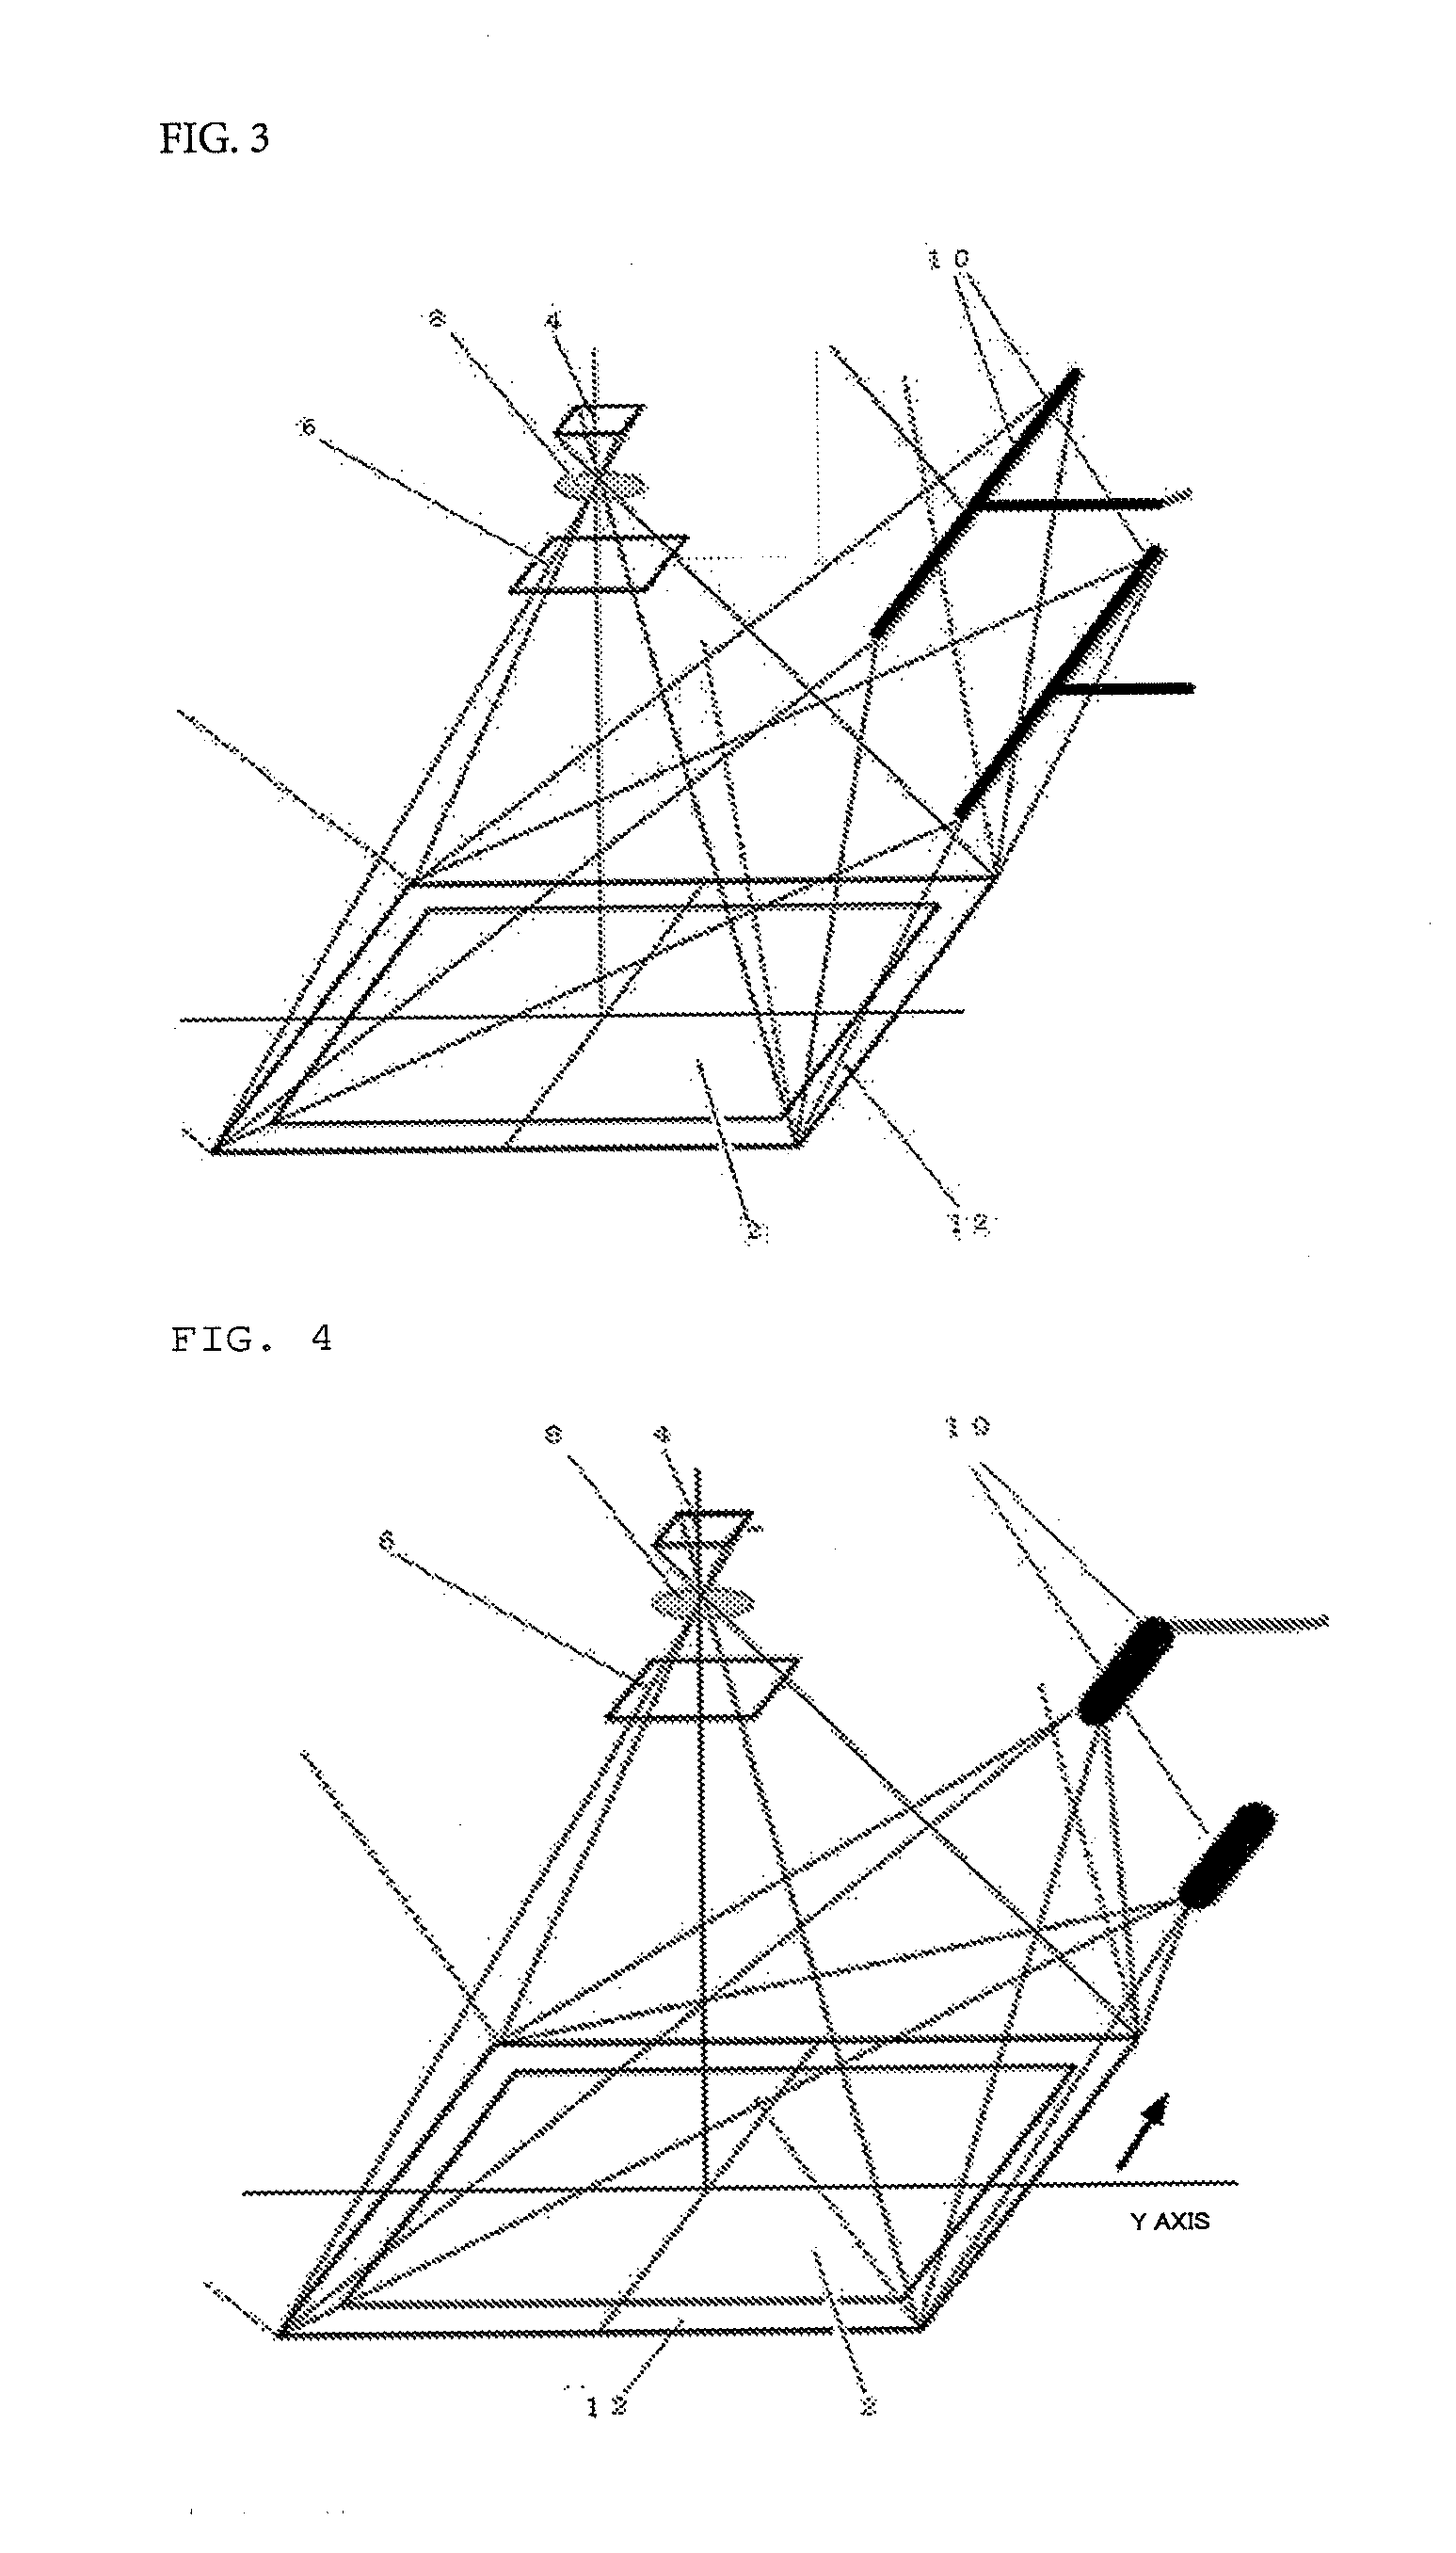 Multi-angle spectral imaging measurement method and apparatus